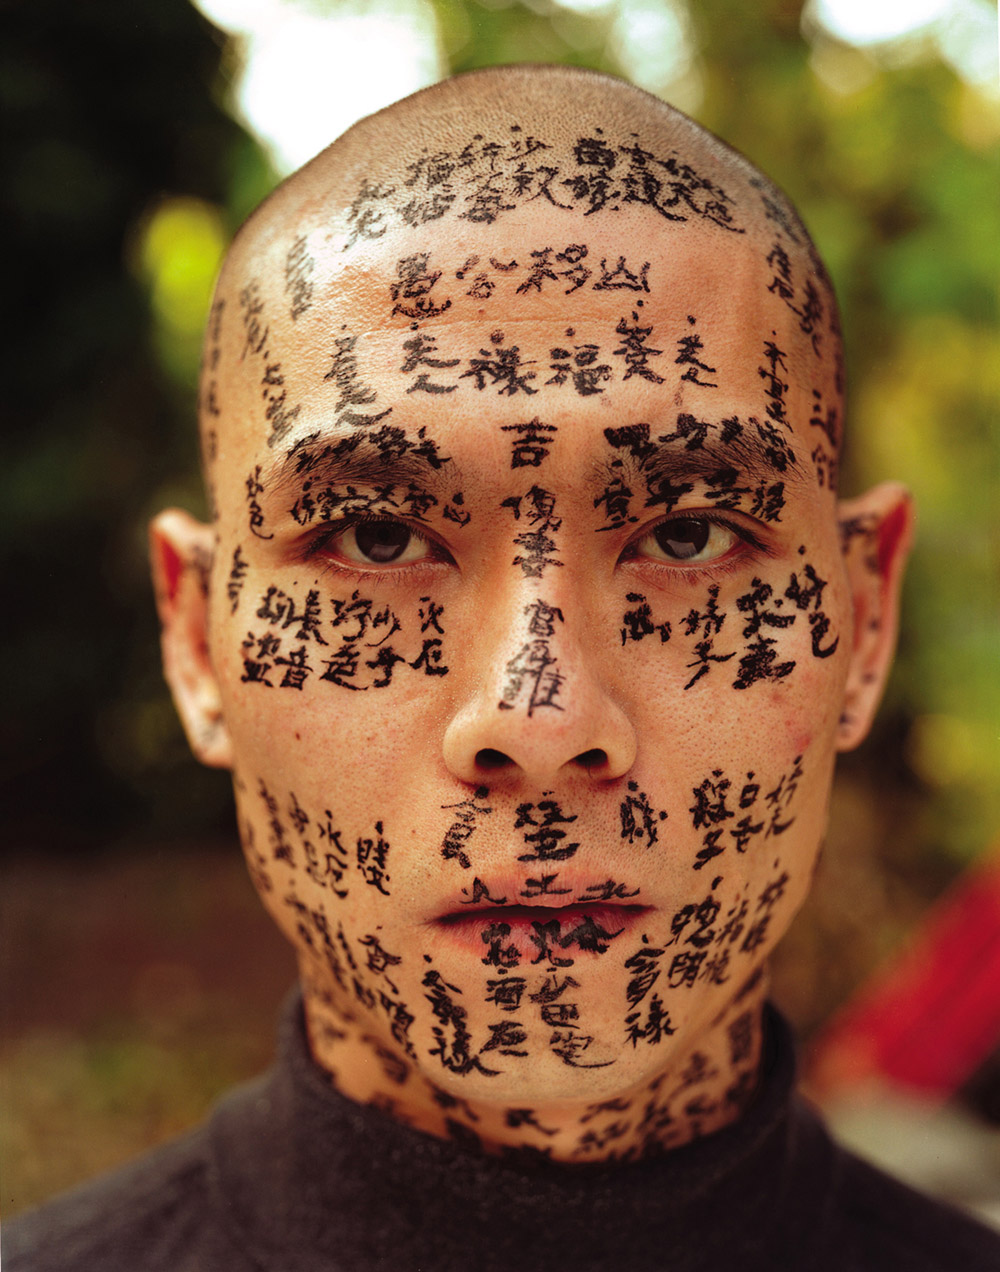 Secret Signs: ZHANG Huan, „Family Tree“, 2000, Farbfotografie, 127 x 102 cm (Detail) © ZHANG Huan, courtesy M+ Sigg Collection. By donation